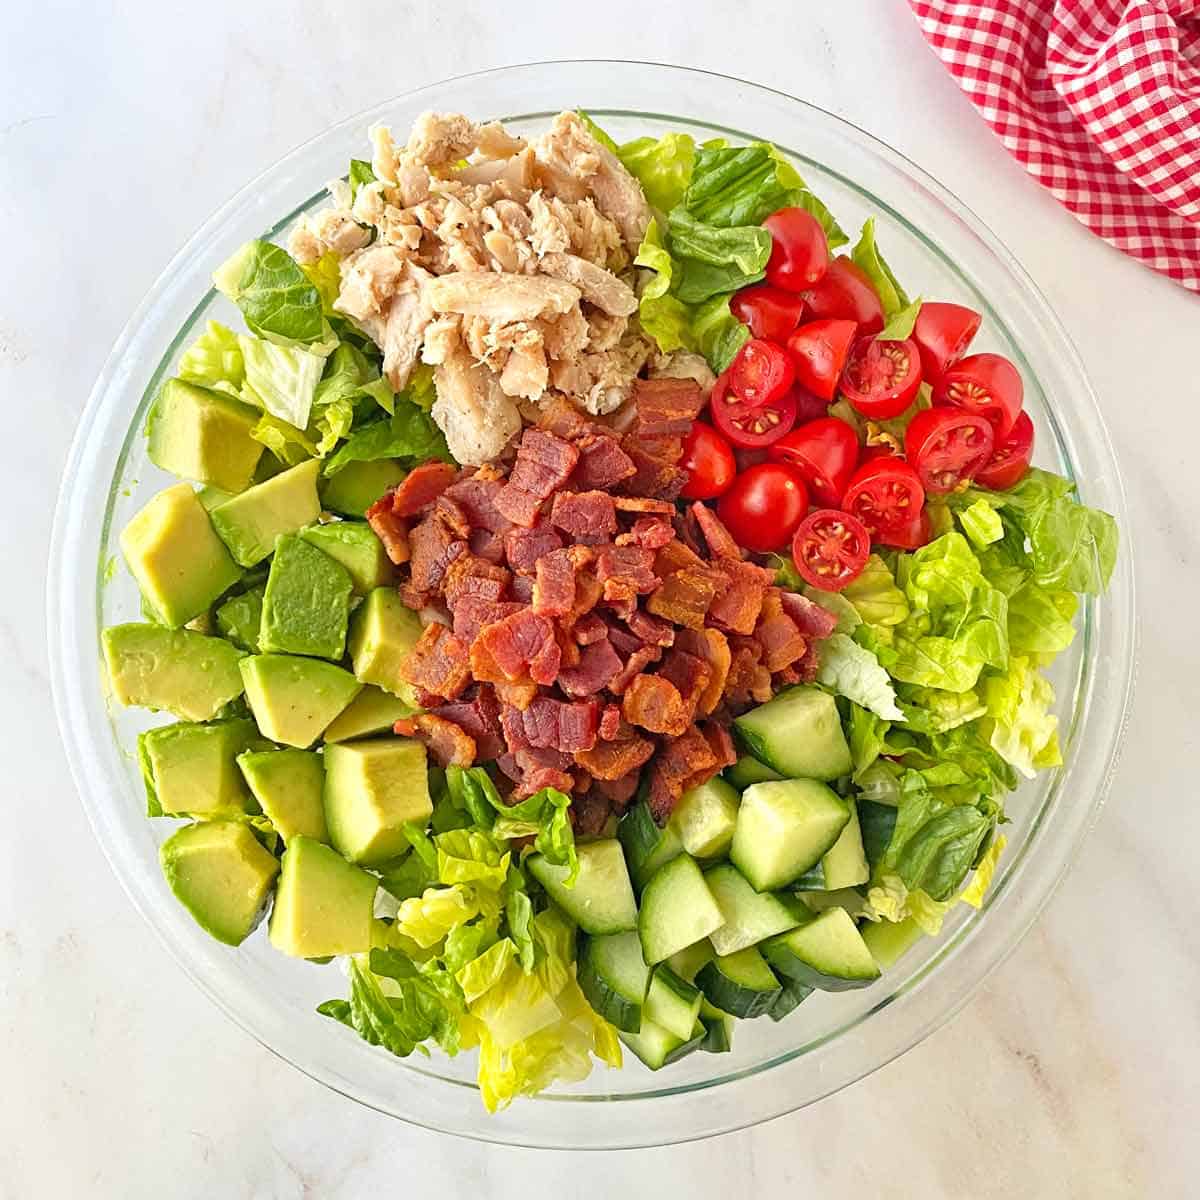 Finished salad with bacon, tomatoes, cucumber, chicken, avocado and ranch dressing in a glass bowl.